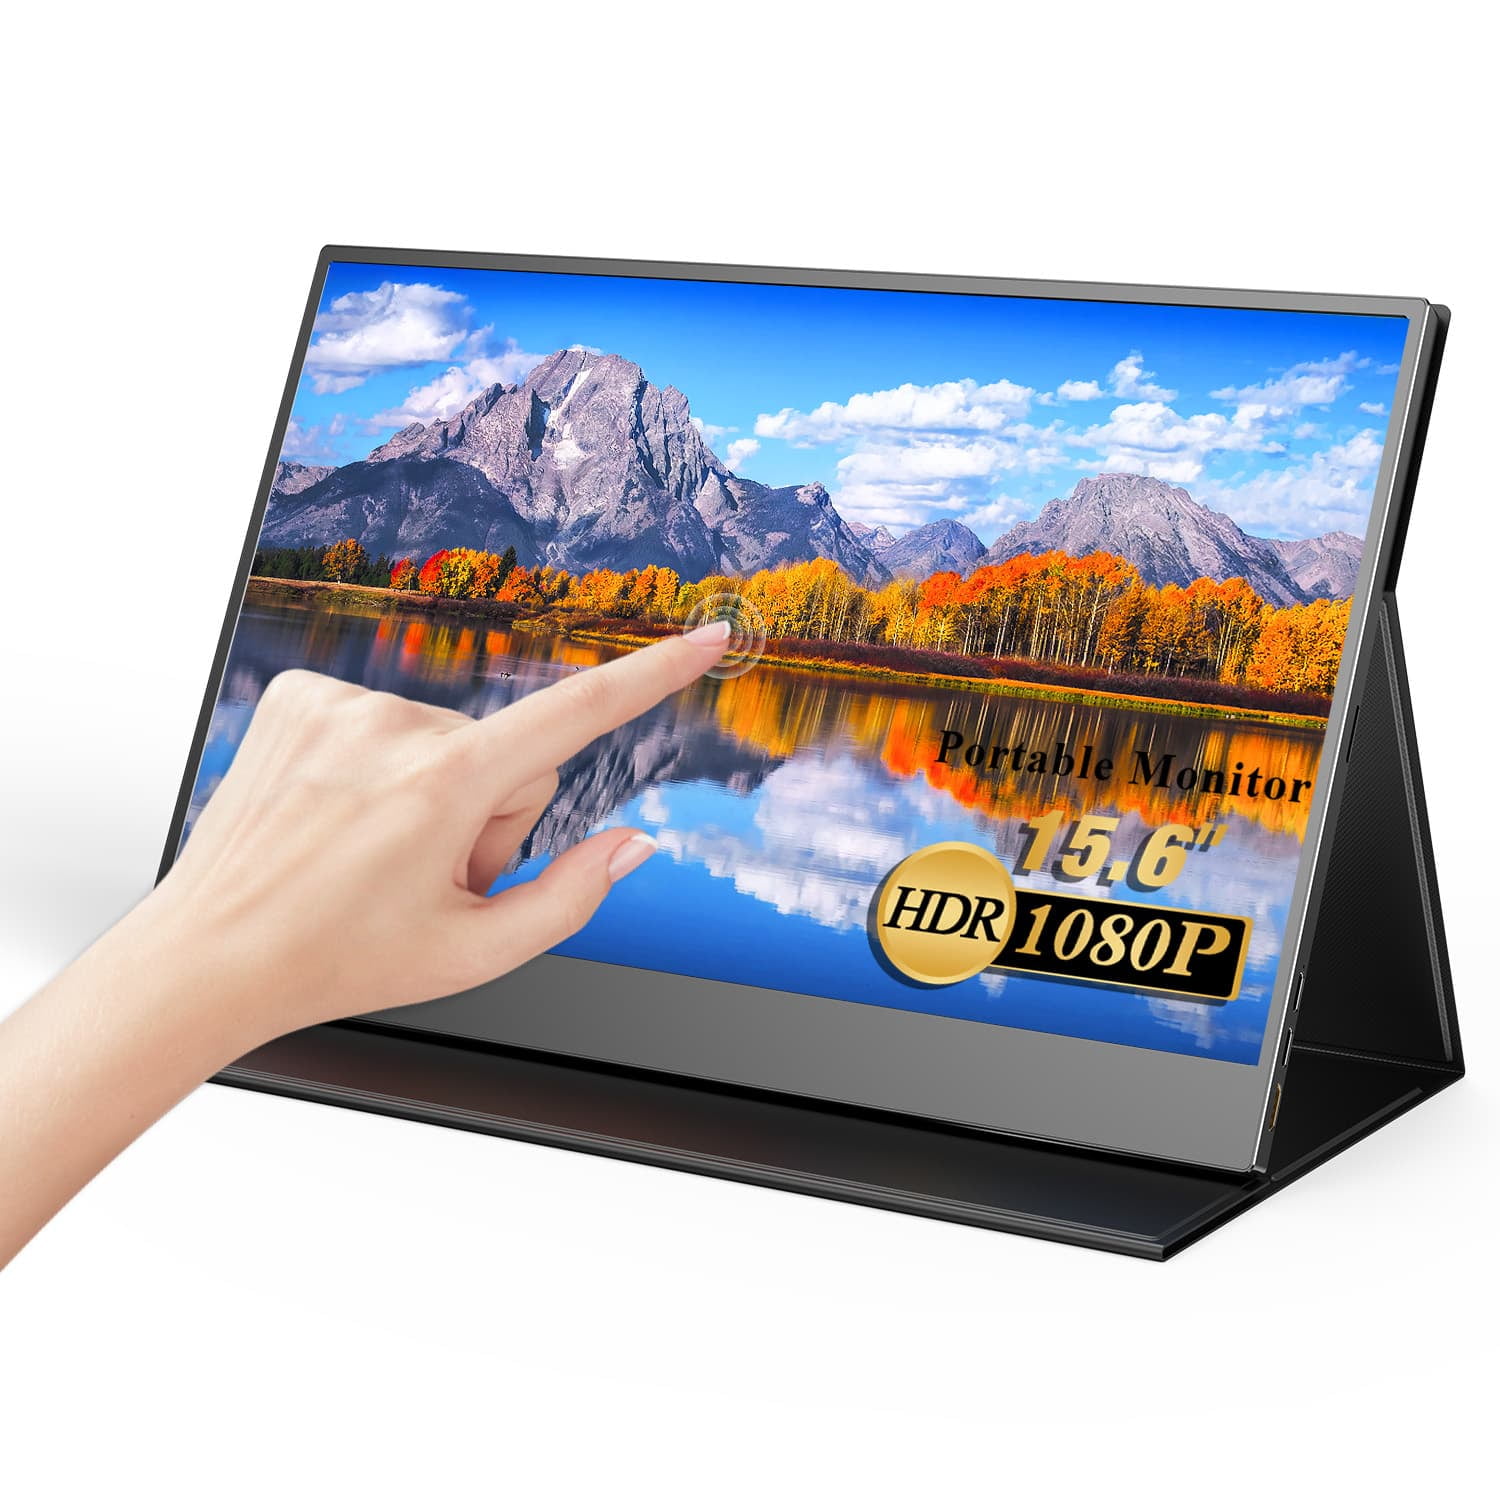 Monitor Touch Screen, UPERFECT 15.6 Inch 1080P FHD HDR Computer Display HDMI USB-C External Laptop Screen, Touchscreen Monitor With Smart Case for PC, Xbox, Phones Walmart.com